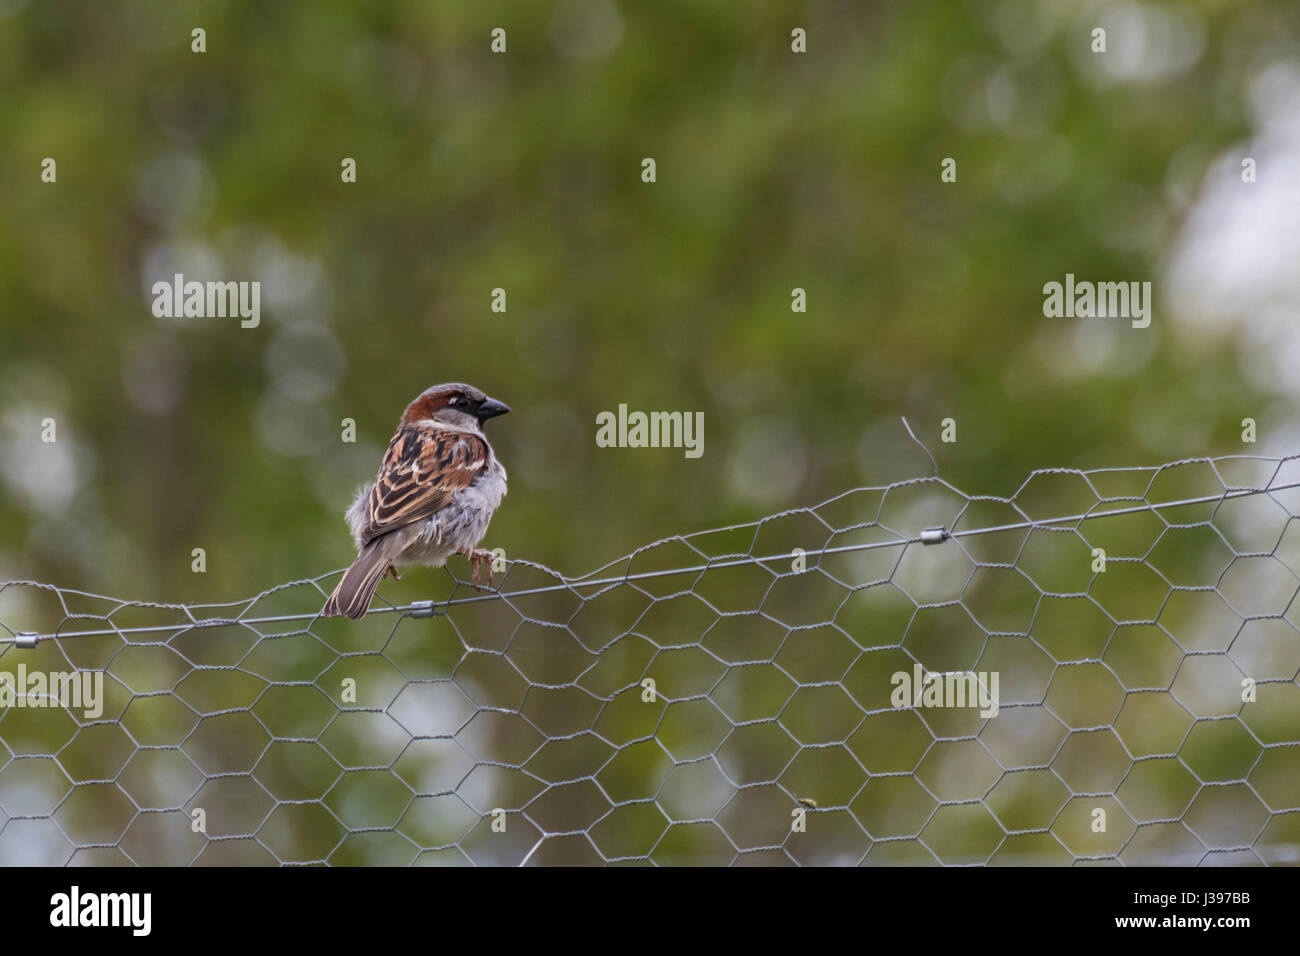 House sparrow perched on chicken wire fence Stock Photo